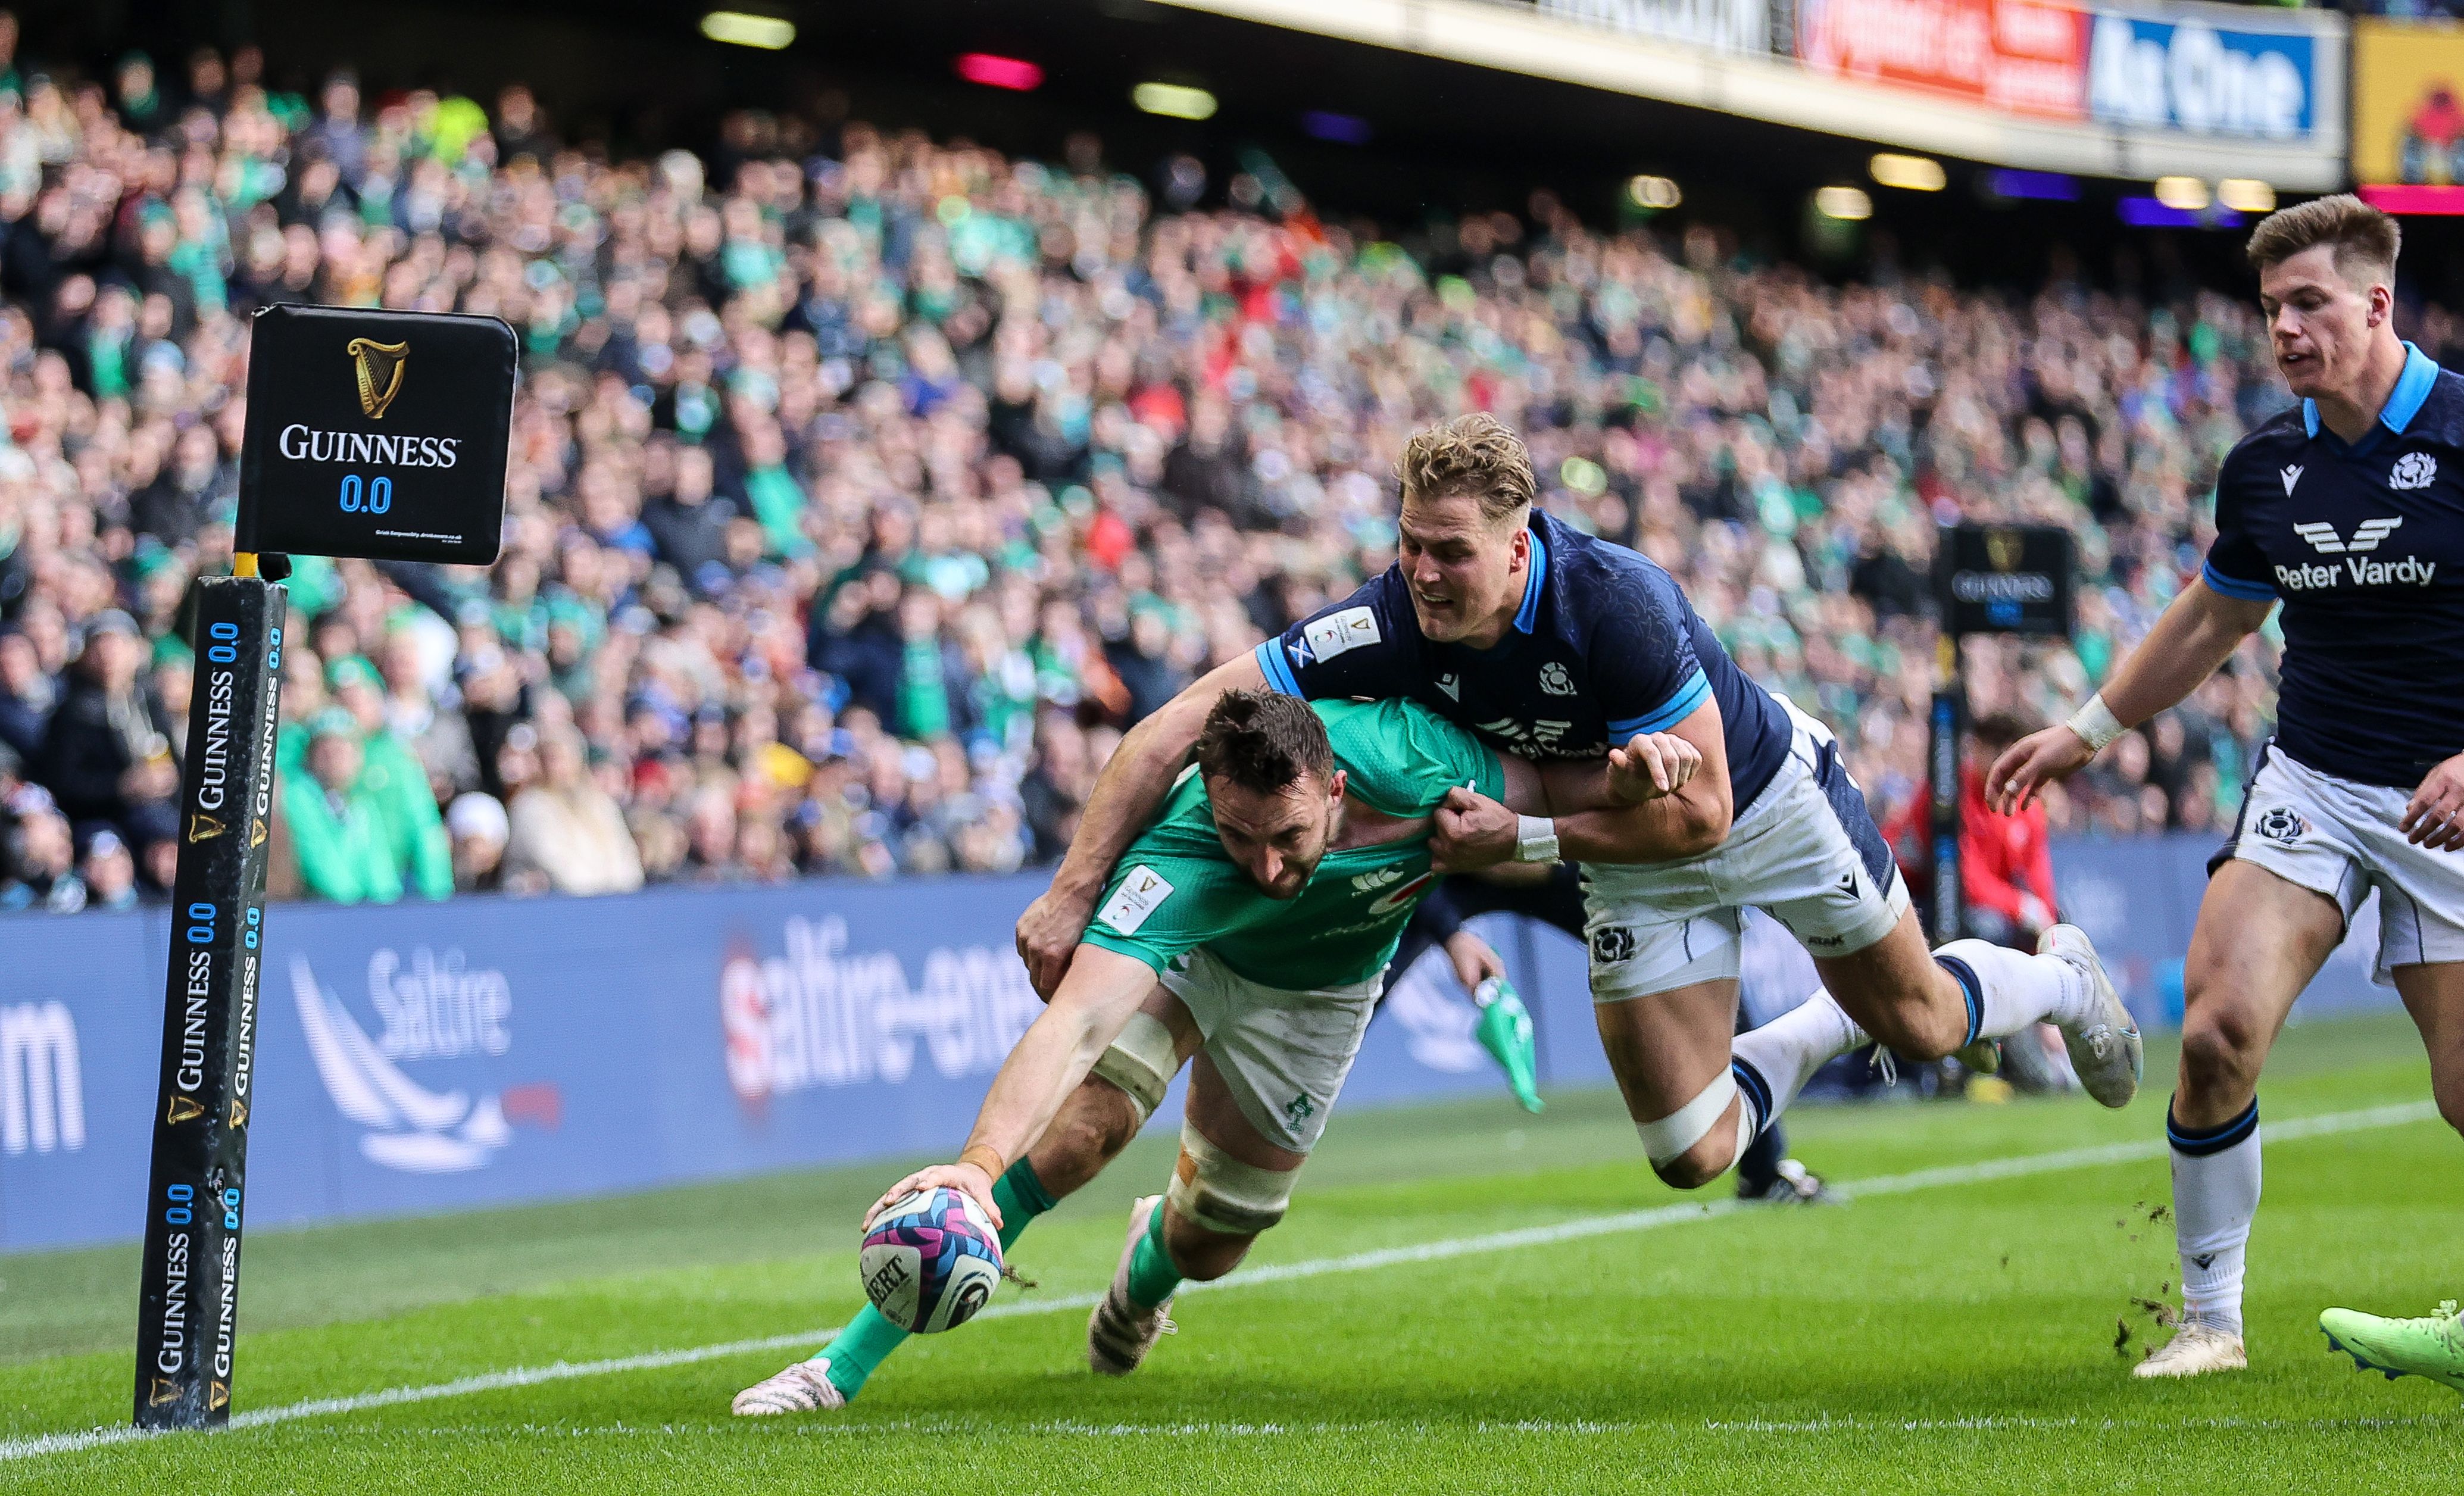 Ireland show mettle vs Scots, set up Grand Slam game on Saturday